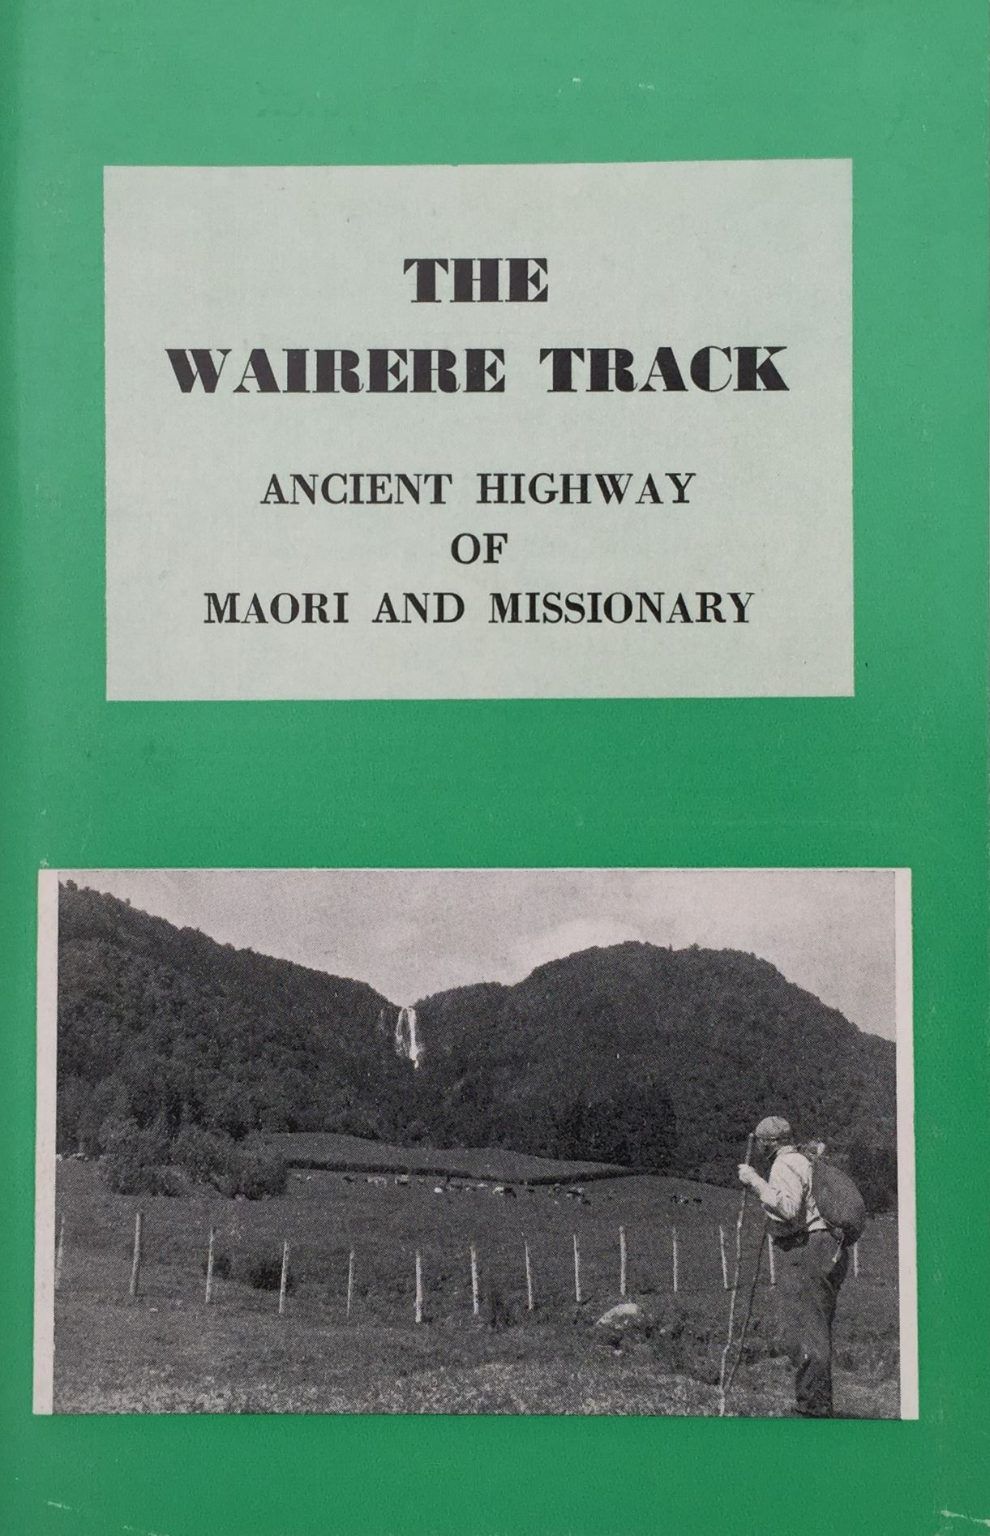 THE WAIRERE TRACK: Ancient Highway of Maori and Missionary